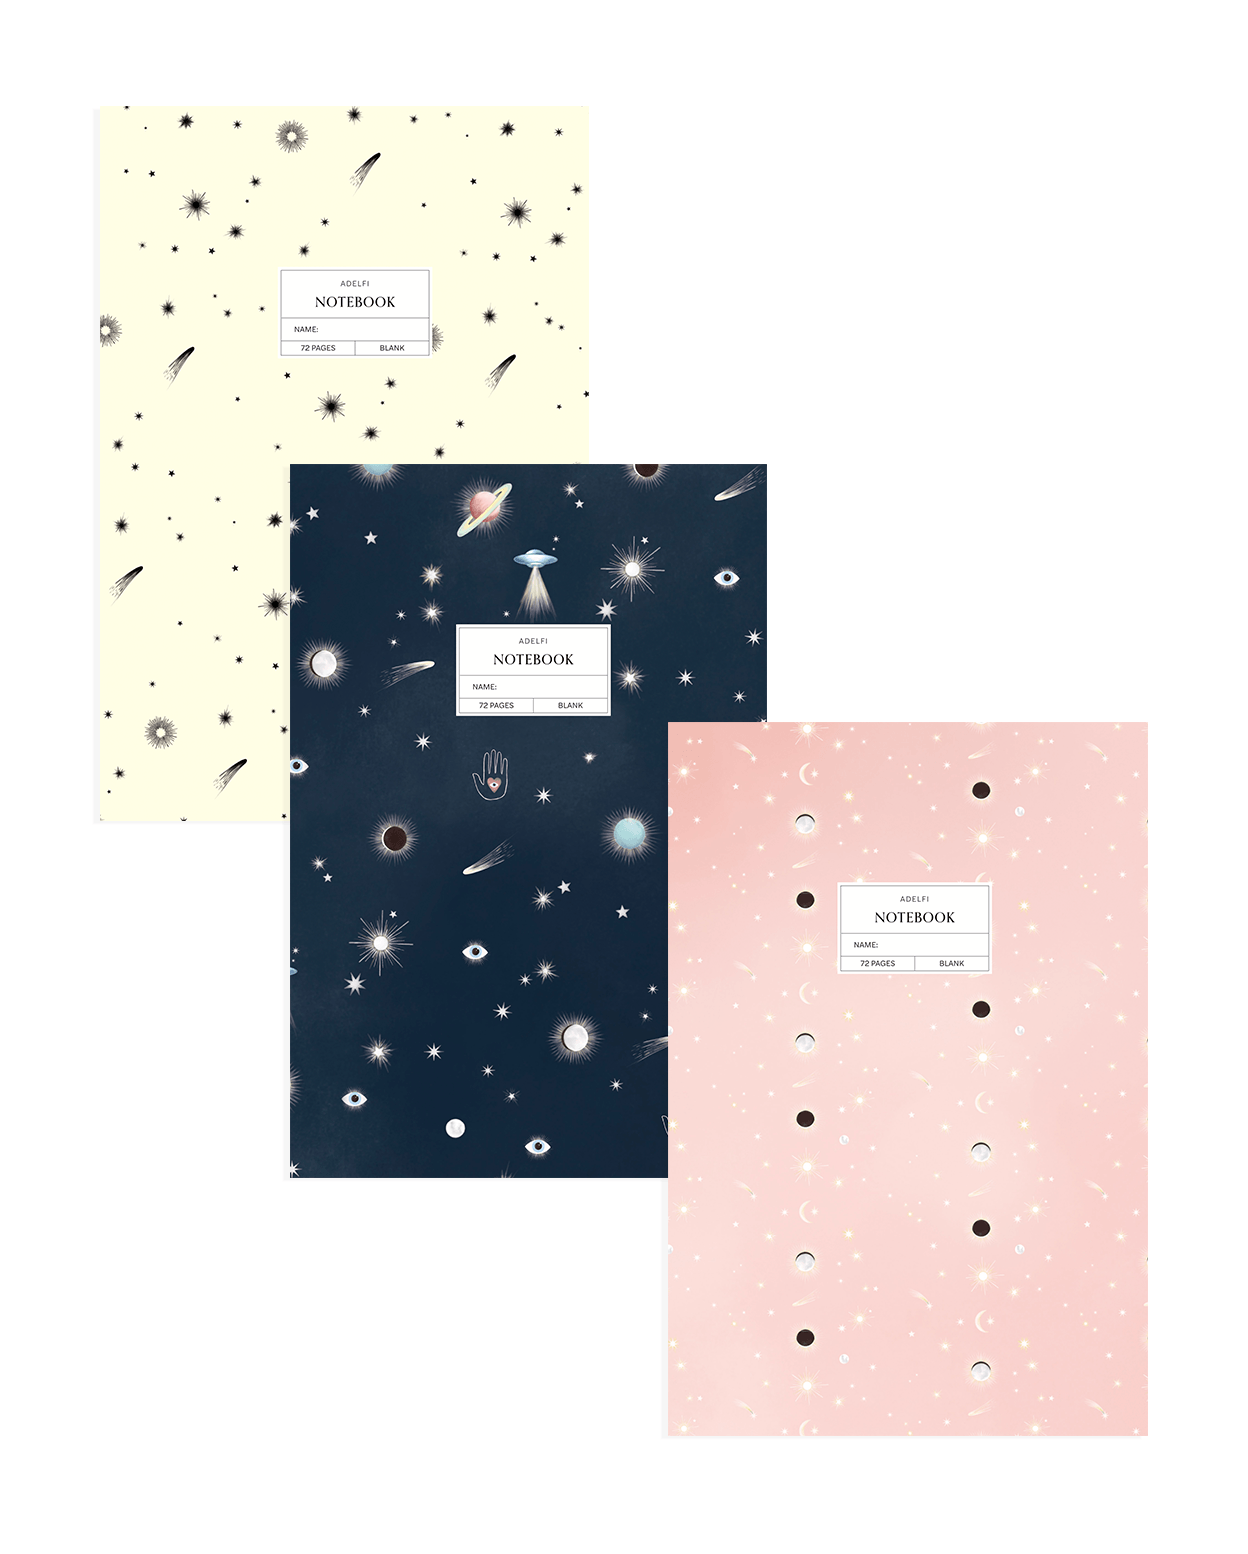 Adelfi notebook trio on a white background. One notebook has a cream background with black stars and comets, the second is navy blue with mystical outer space icons, and the third is pink with stars and eclipsing moons. 